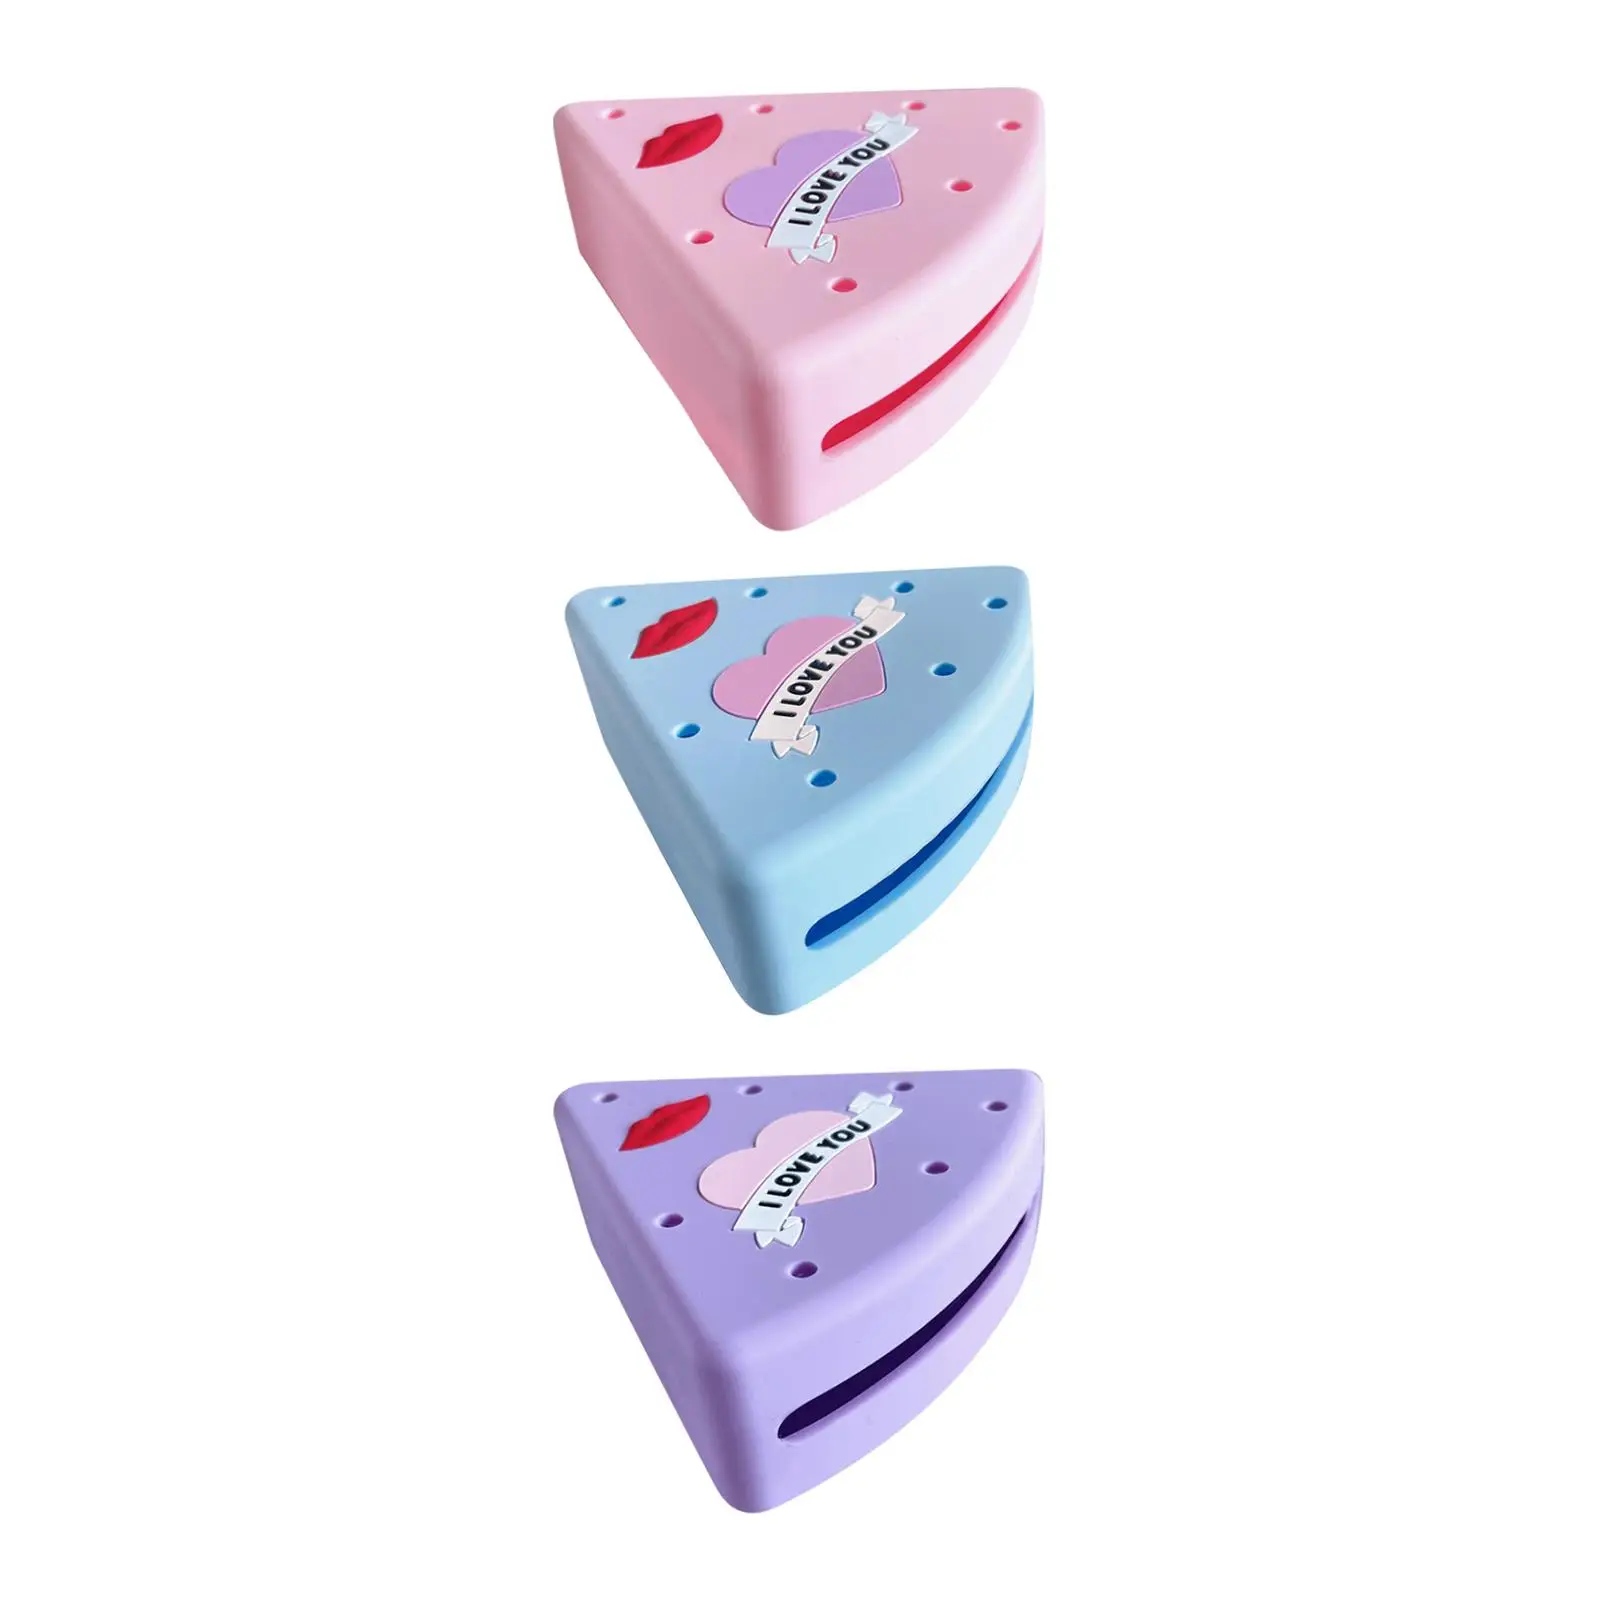 Triangle Makeup Sponge Holder Compact Breathable Cute Protective Container Powder Puff Case Makeup Sponge Storage Box for Travel